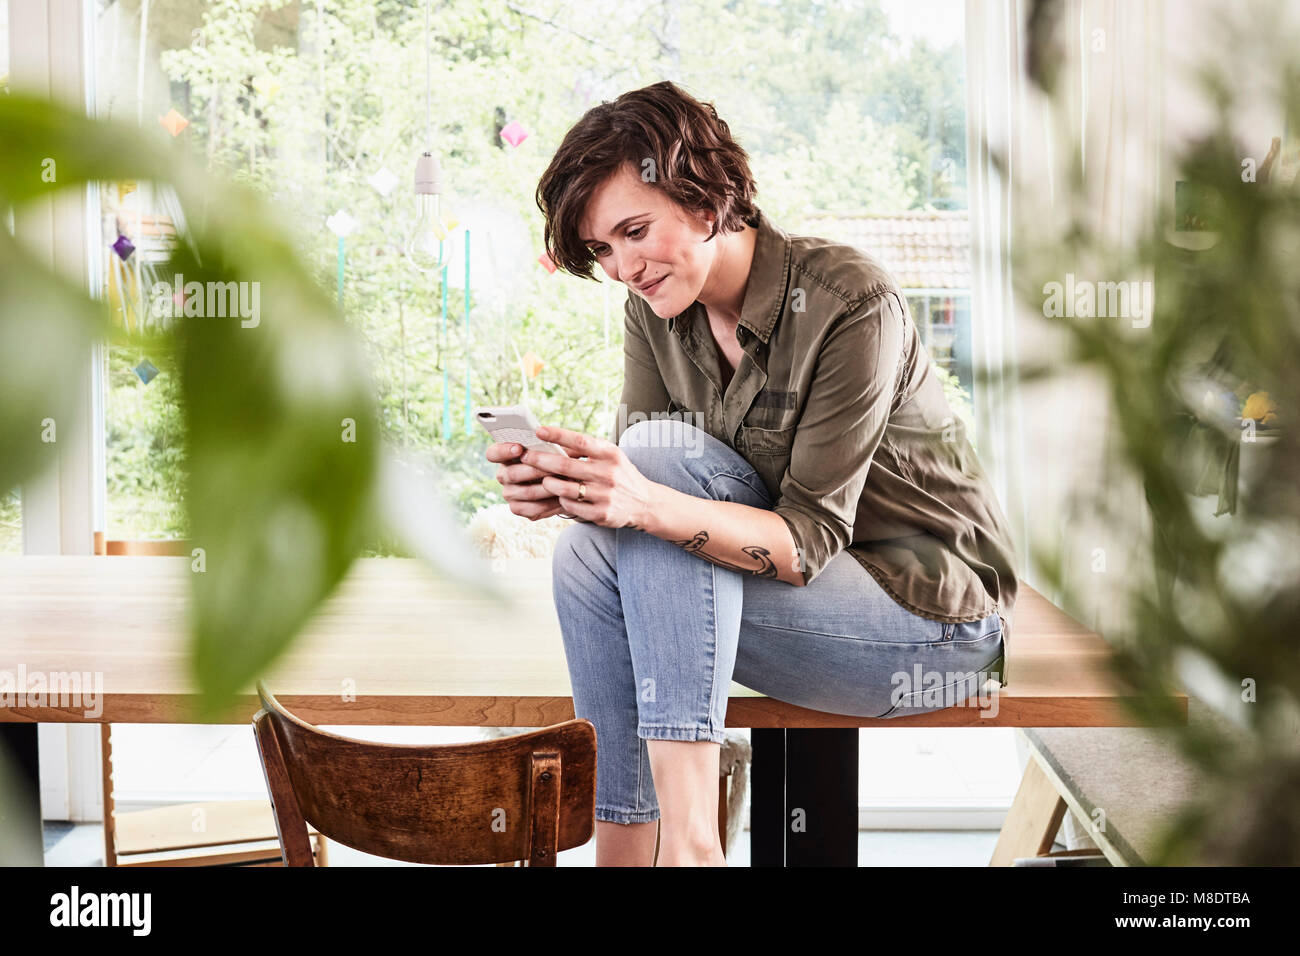 Mid adult woman at home, sitting on table, using smartphone Stock Photo